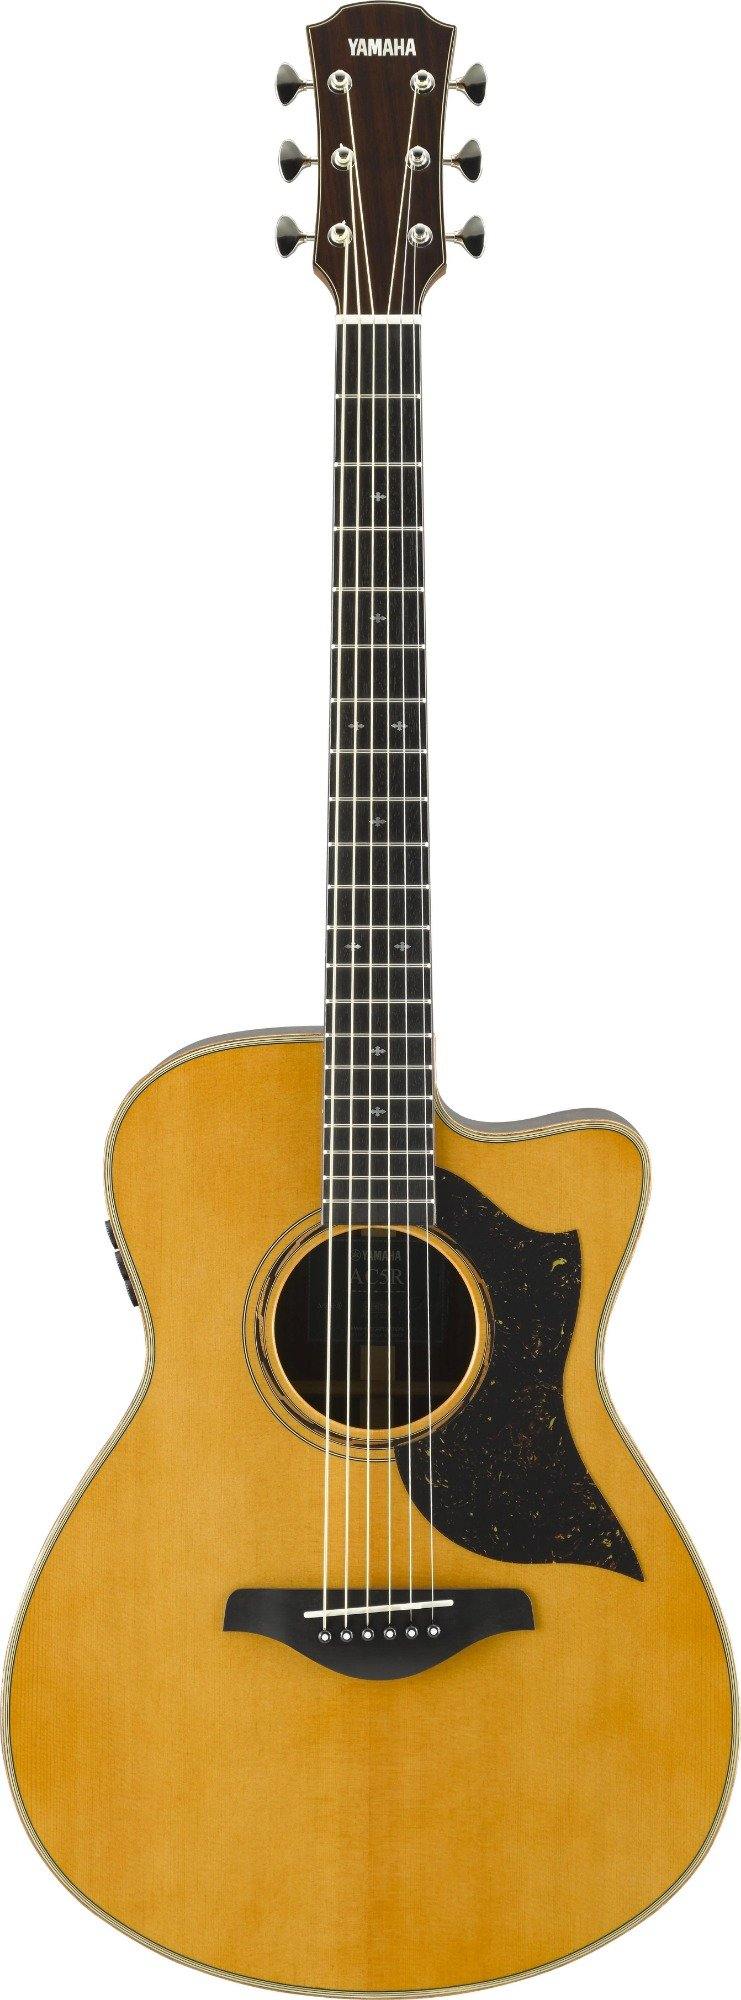 YAMAHA AC5R VN ELECTRIC ACOUSTIC GUITAR - Rockit Music Canada